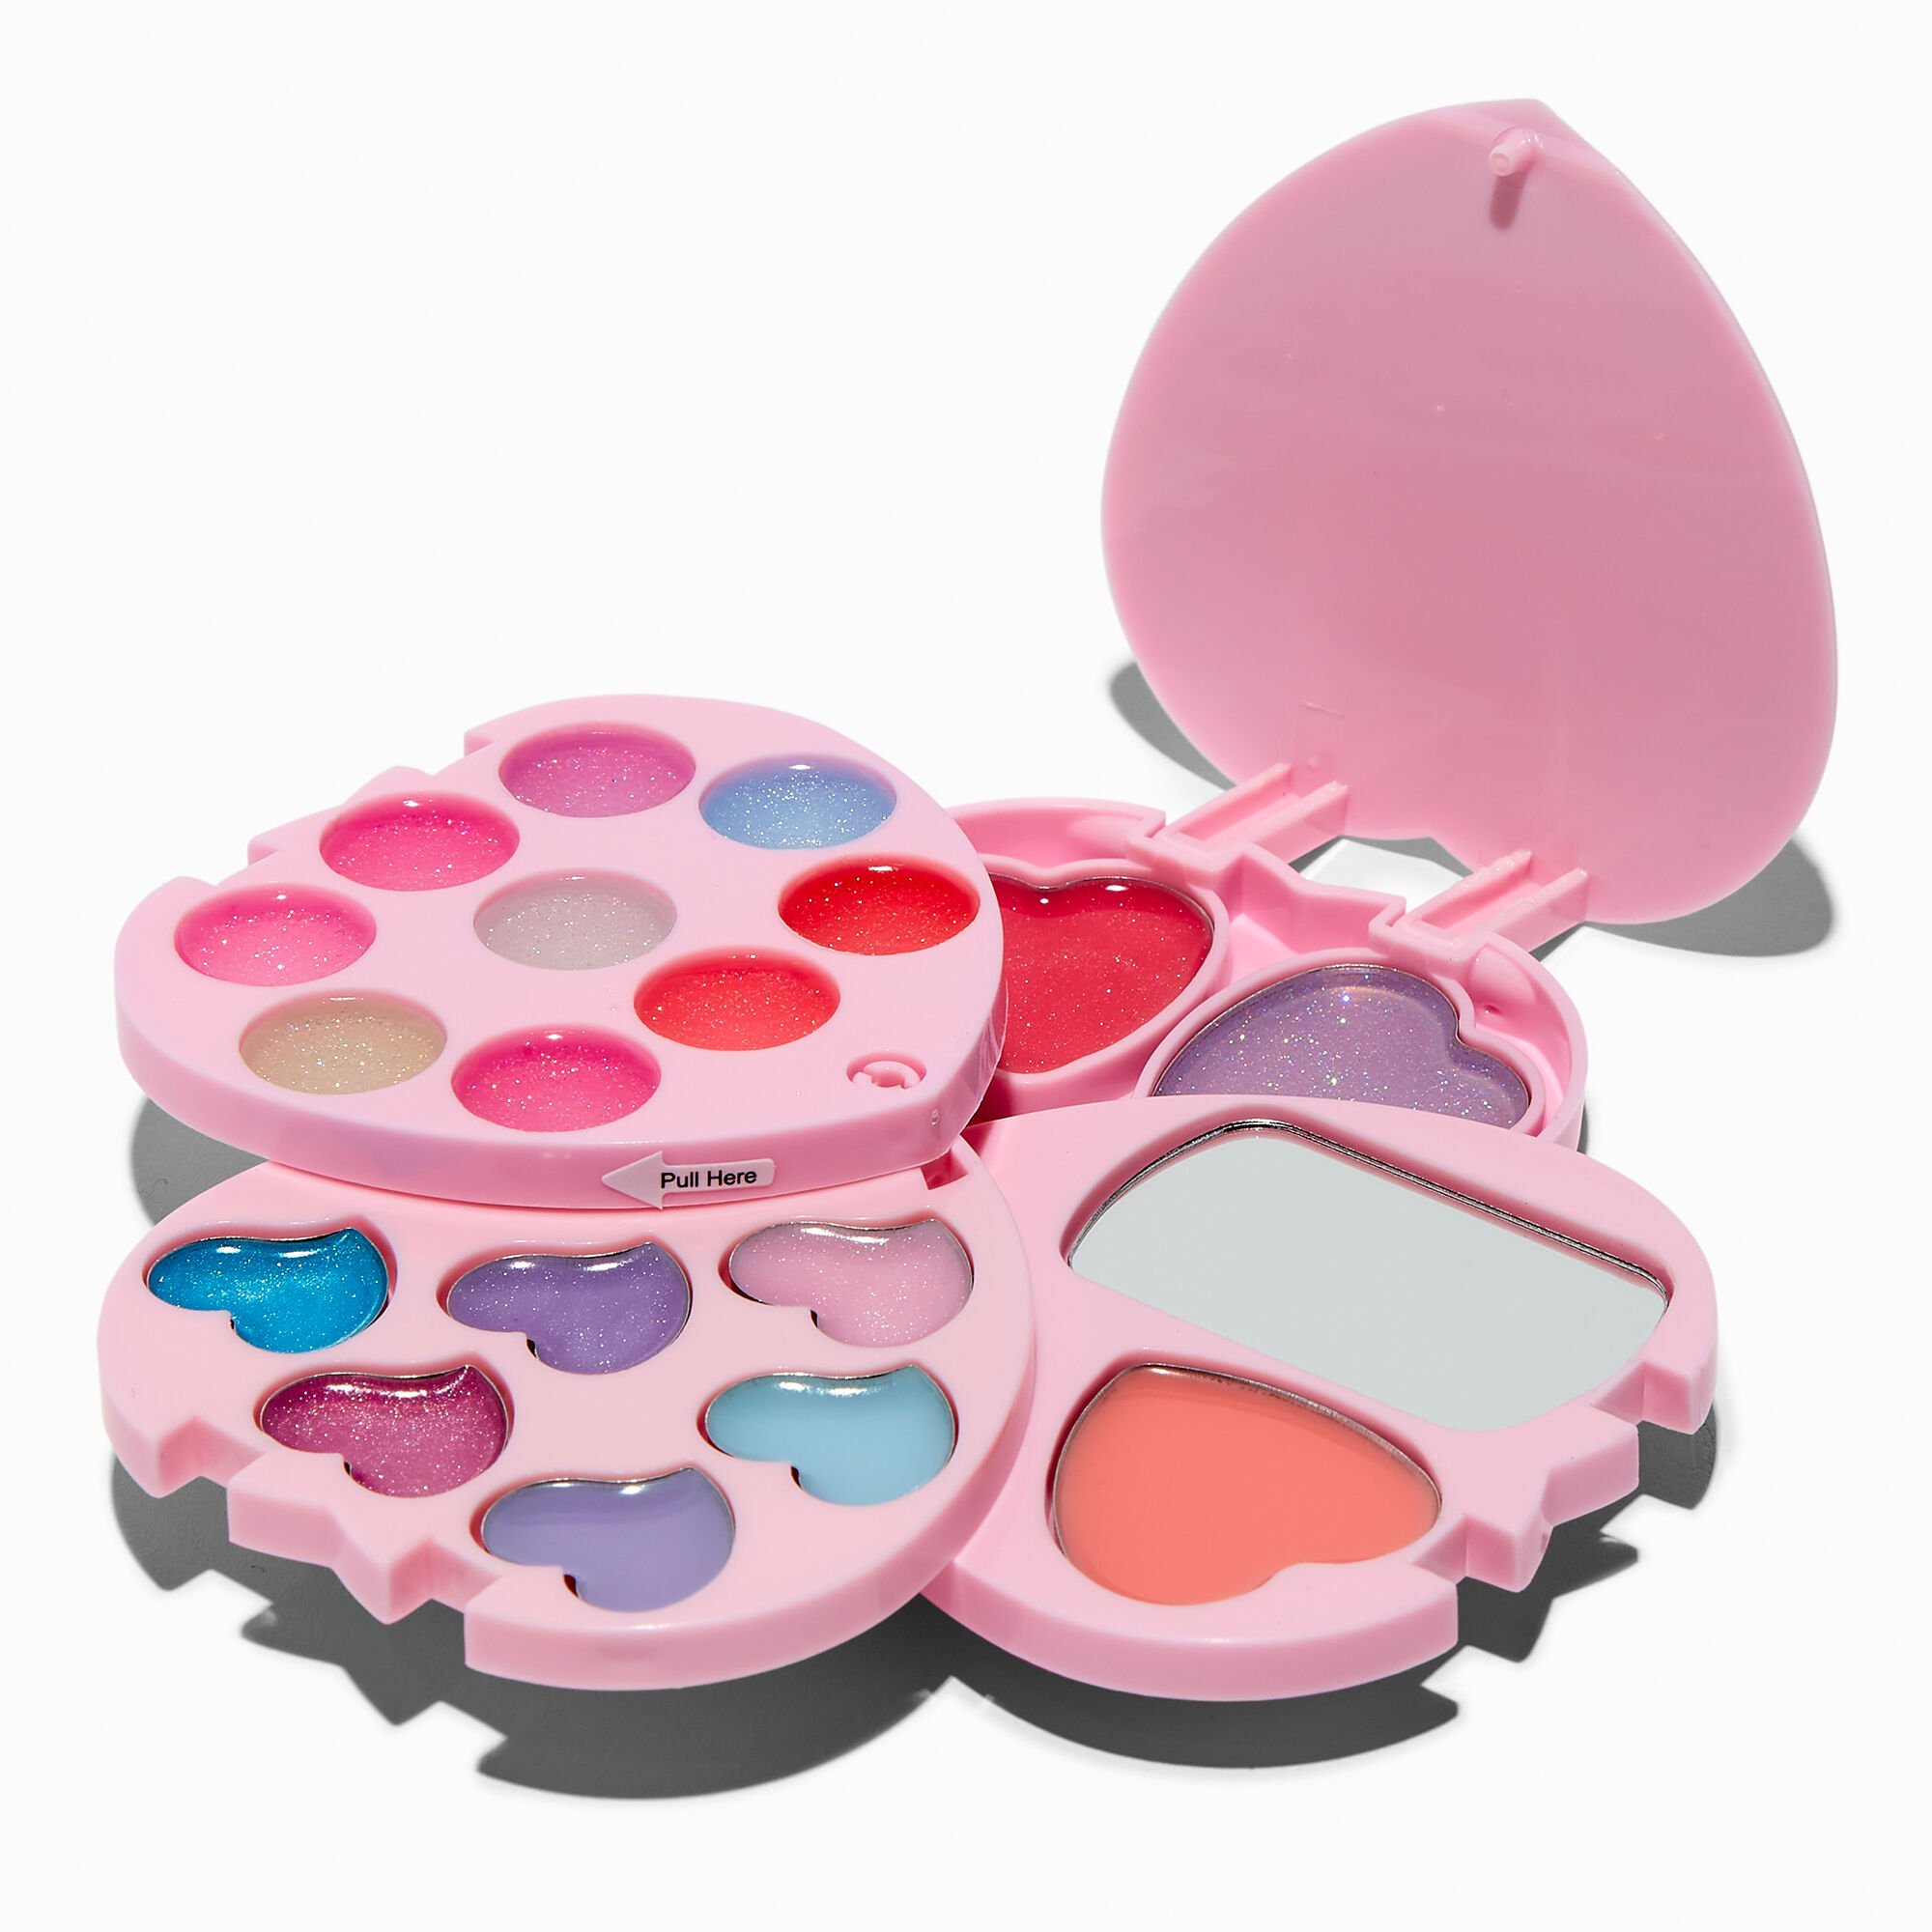 View Claires Club Heart Bling Makeup Set Pink information